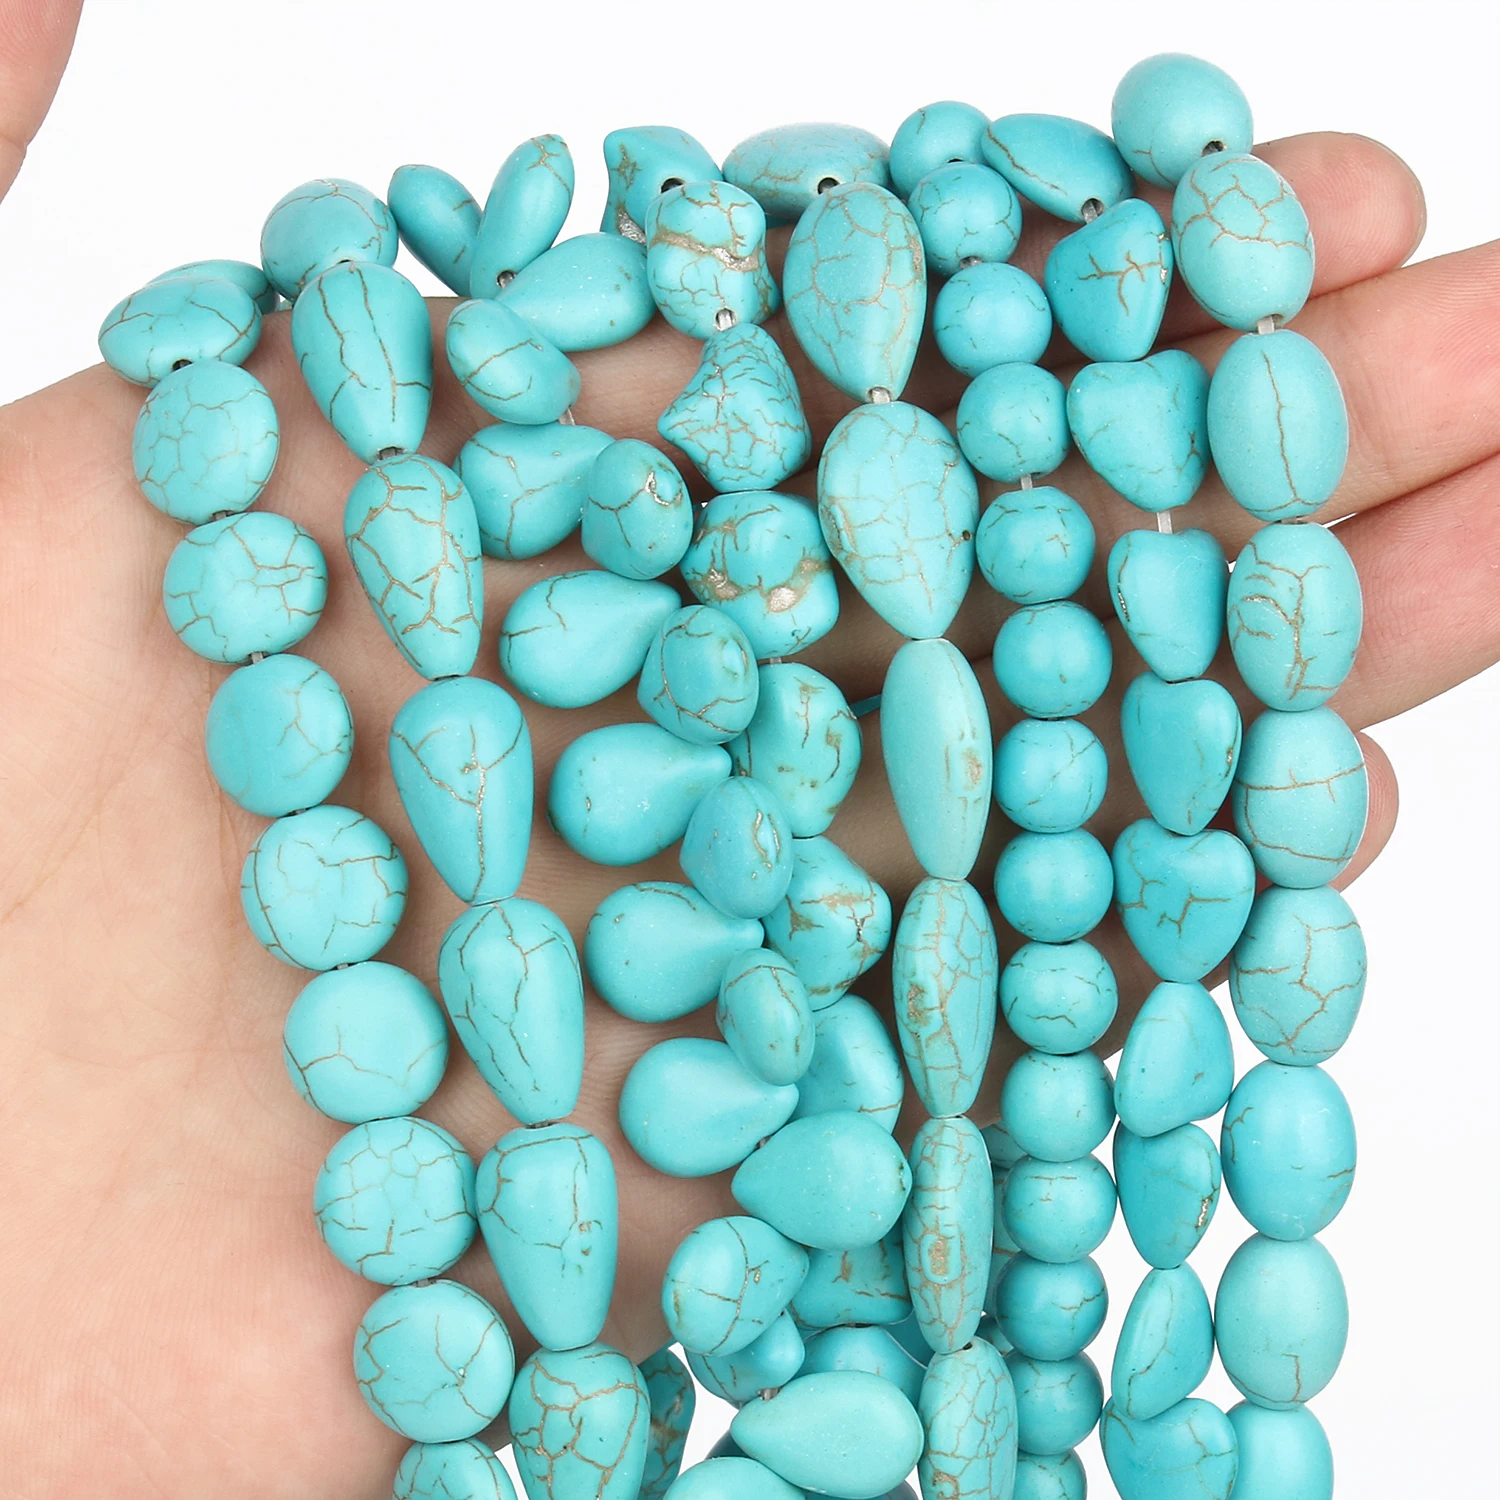 Natural Turquoise Gemstone Spacer Loose Beads Charms Jewelry Bracelet Making 